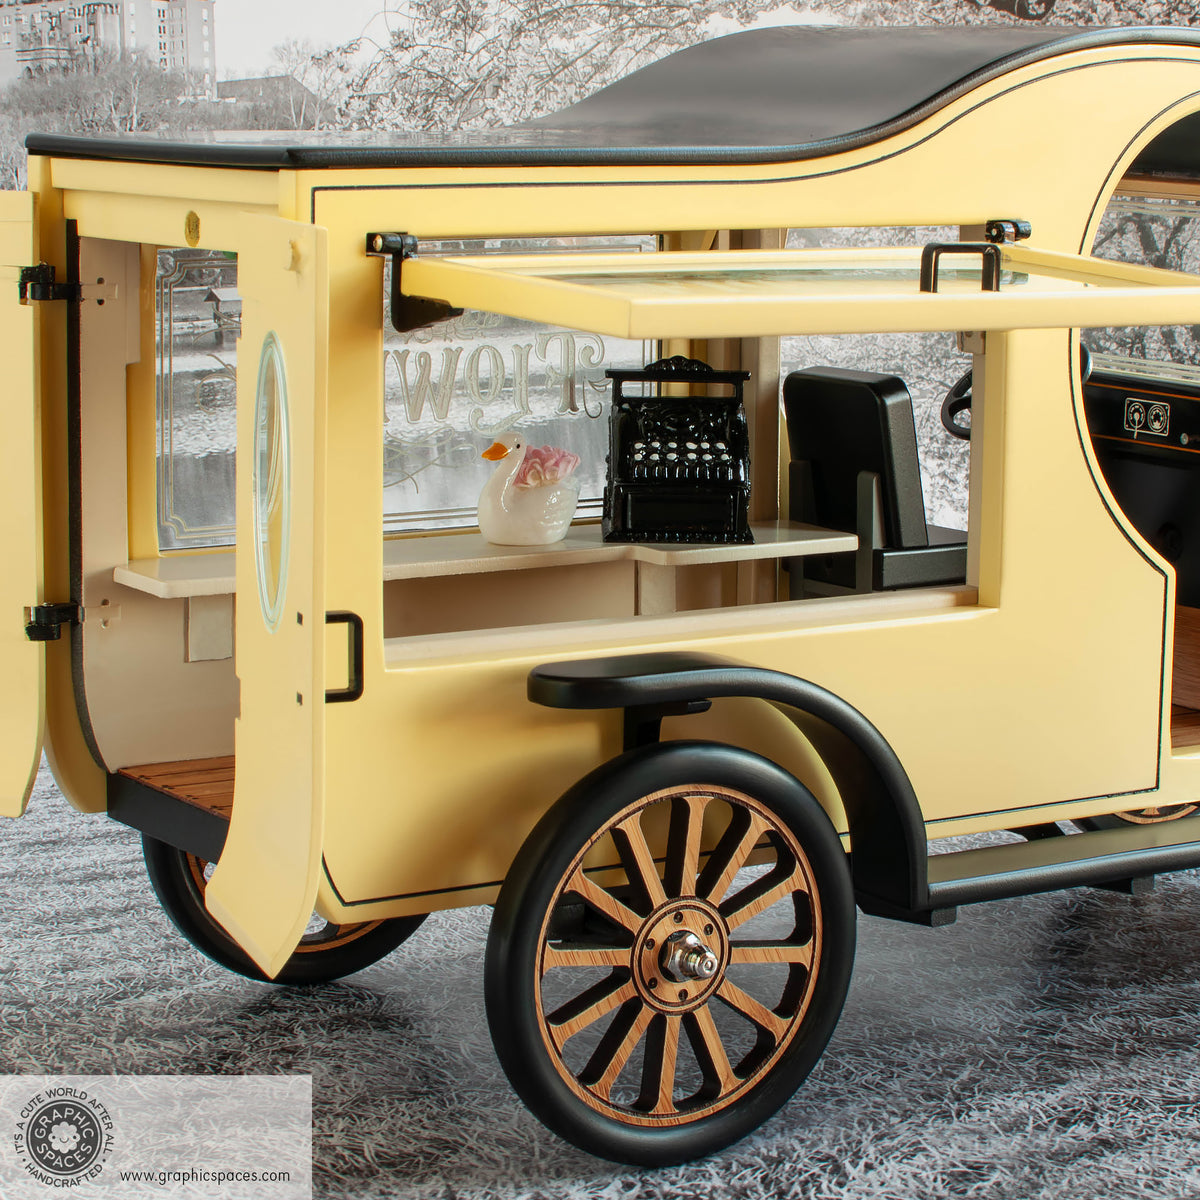 1:12 Scale Room Box Yellow Flower Shop Truck Model T C Cab. Detailed see through view. No Shelves. Window and doors open.